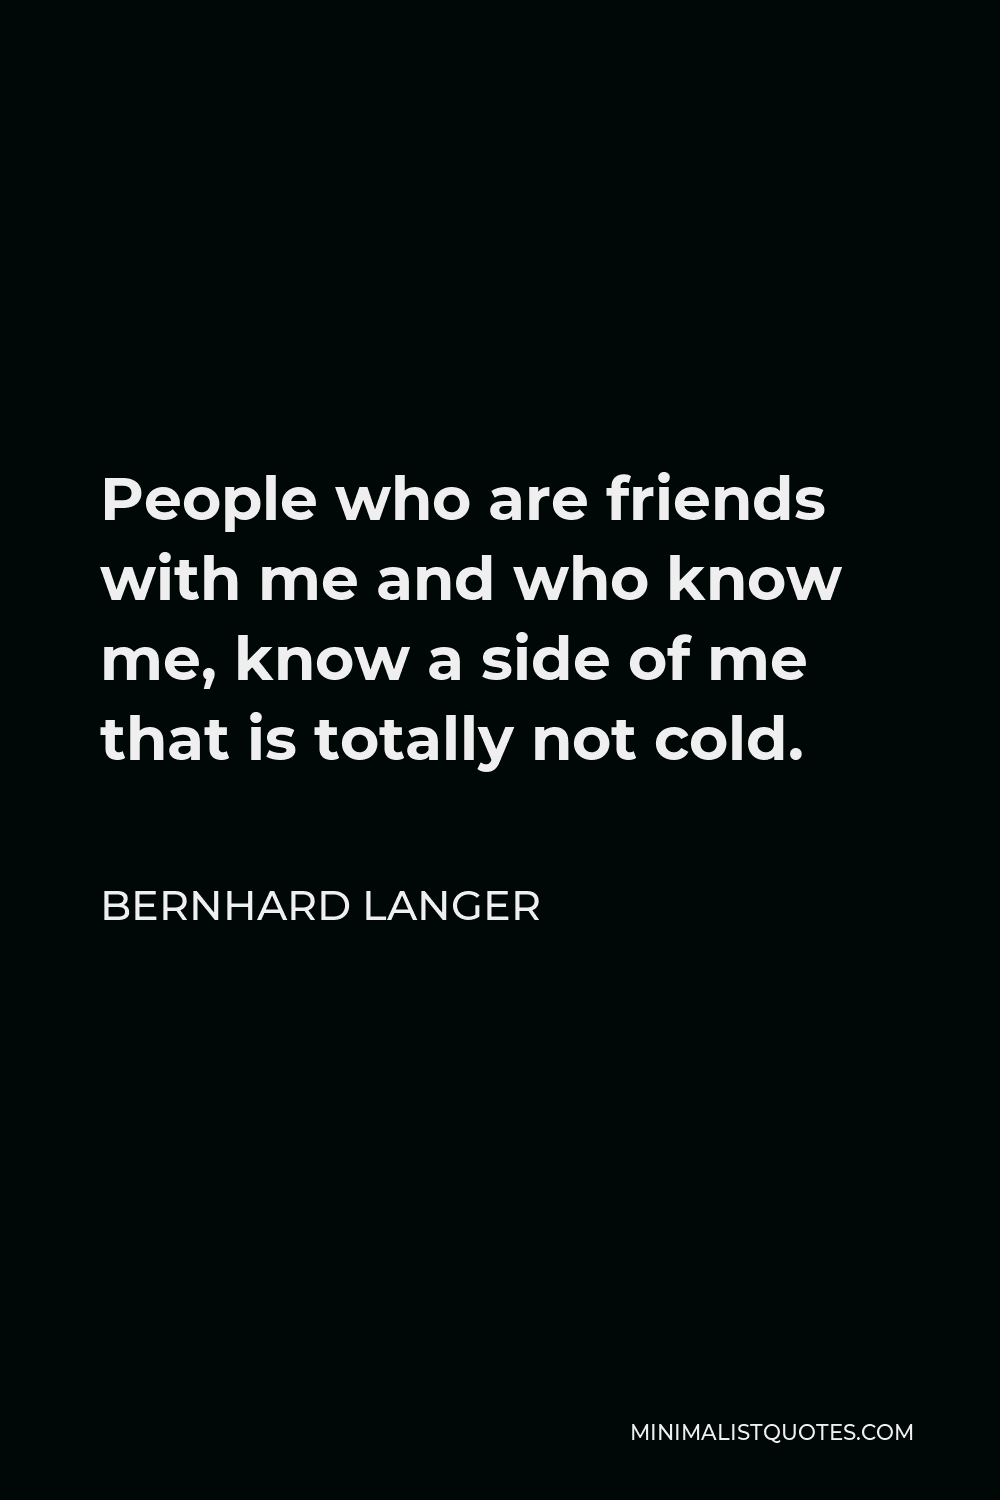 Bernhard Langer Quote - People who are friends with me and who know me, know a side of me that is totally not cold.